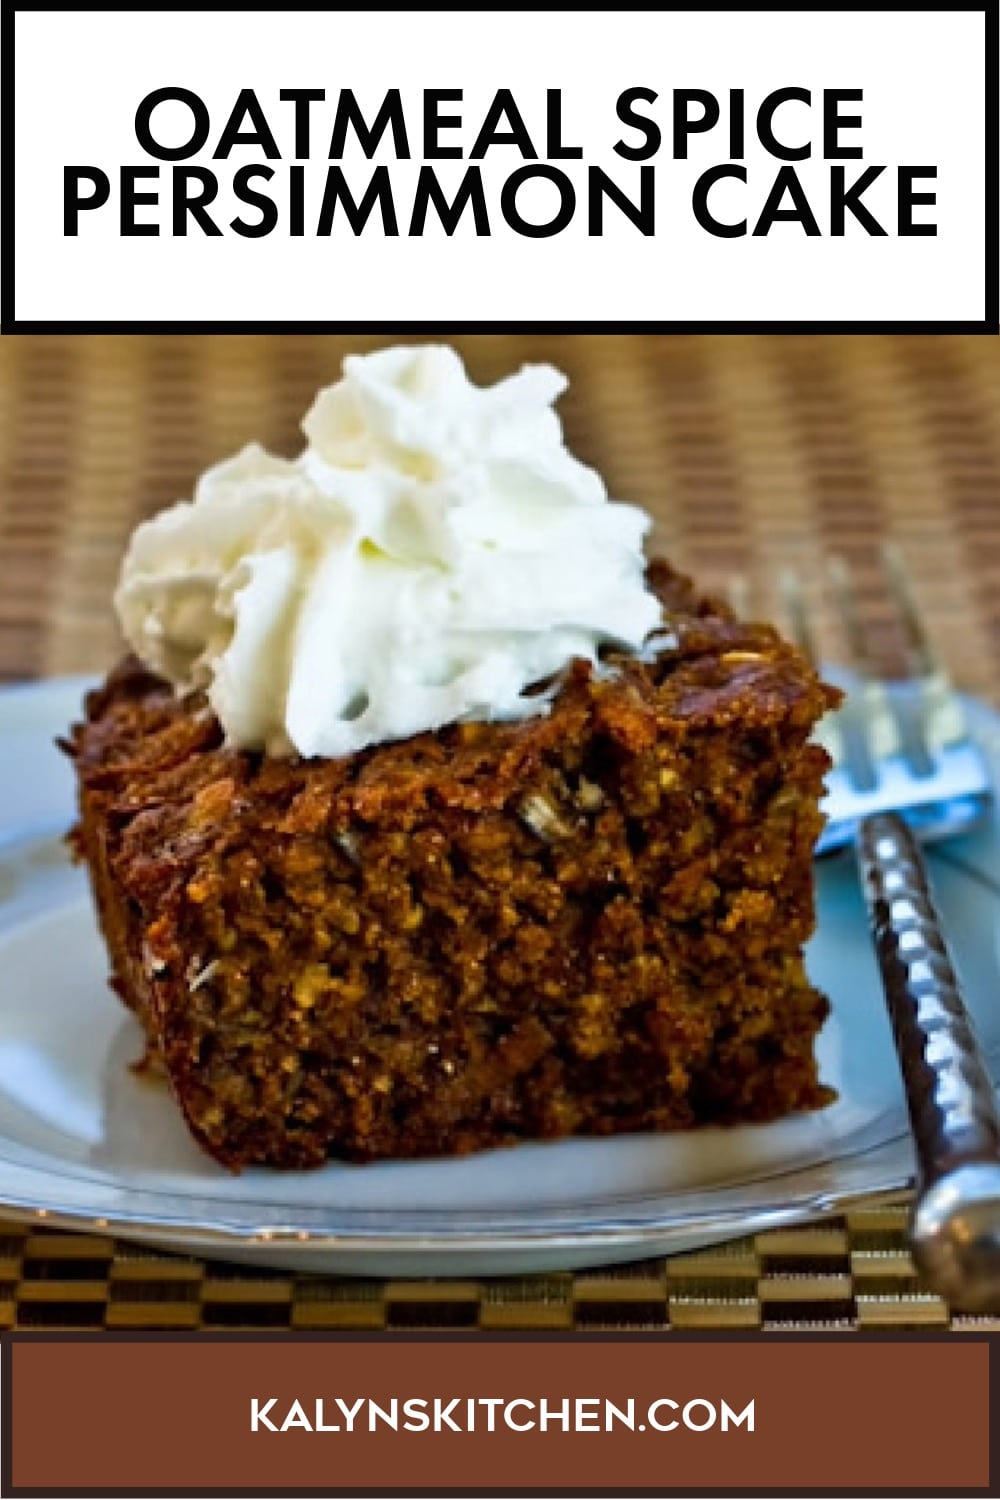 Pinterest image of Oatmeal Spice Persimmon Cake